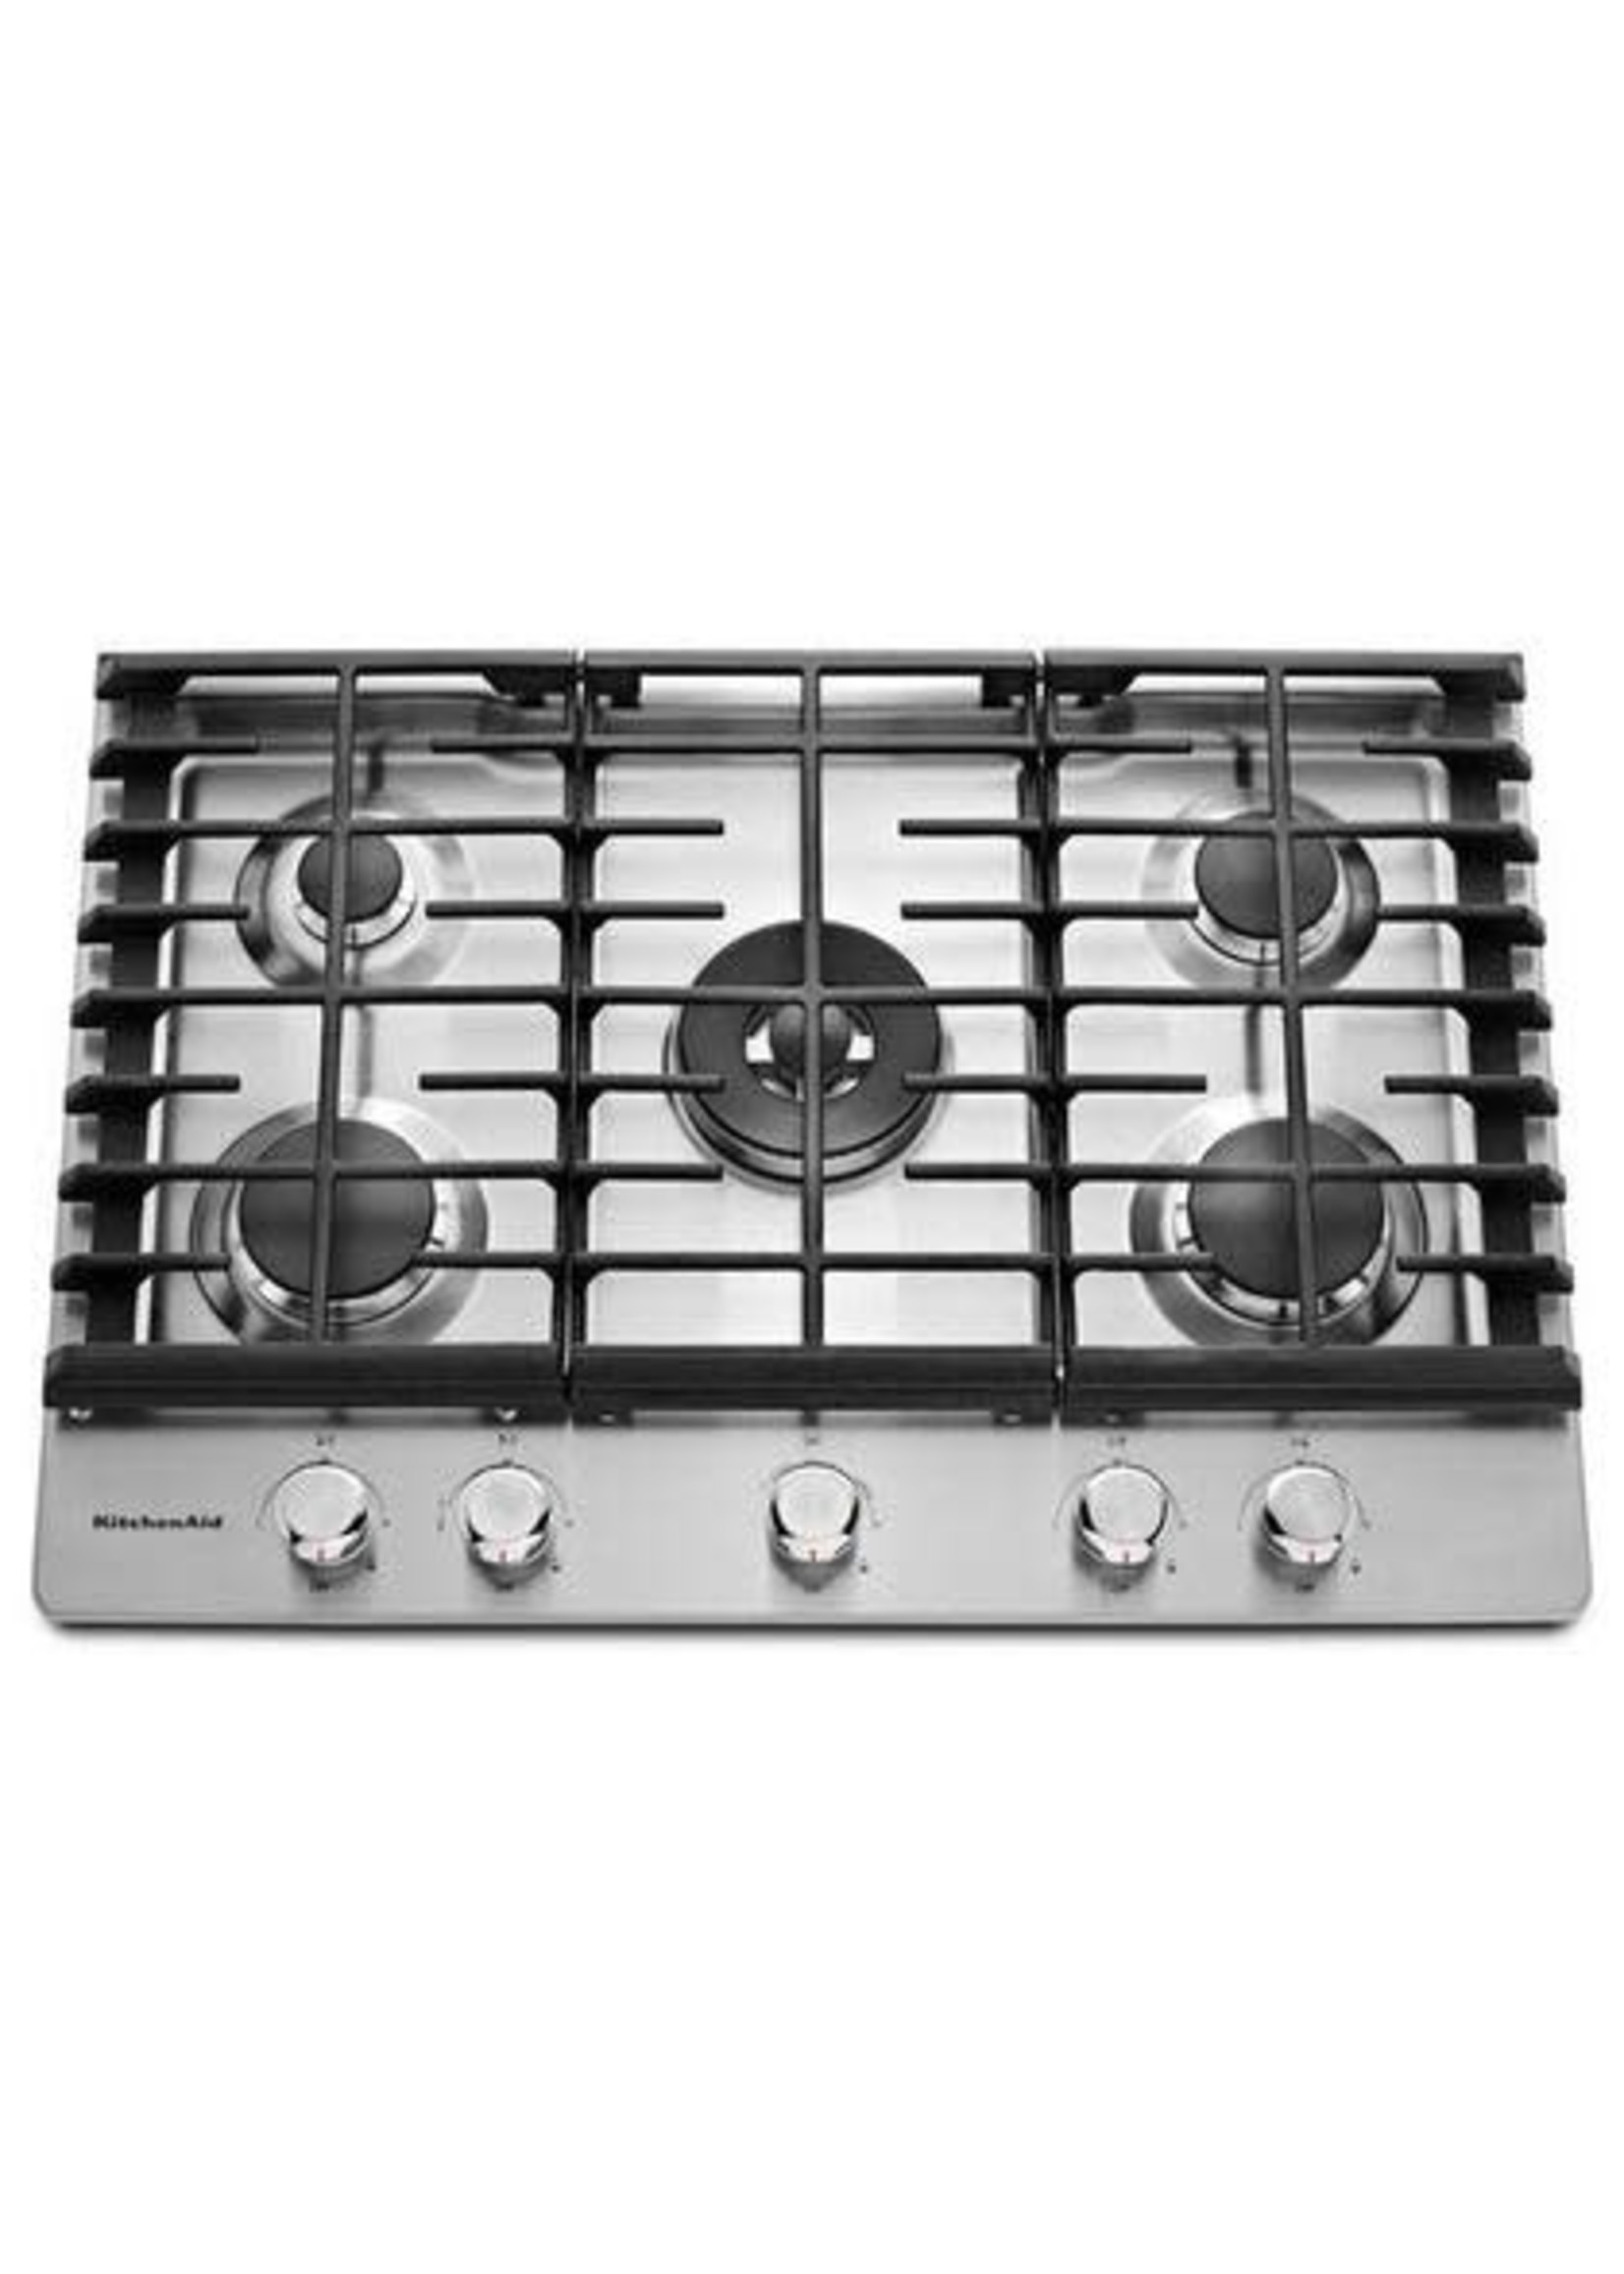 KitchenAid 36 in. Gas Cooktop in Stainless Steel with 5 Burners Including a Professional Dual Tier Burner and a Simmer Burner